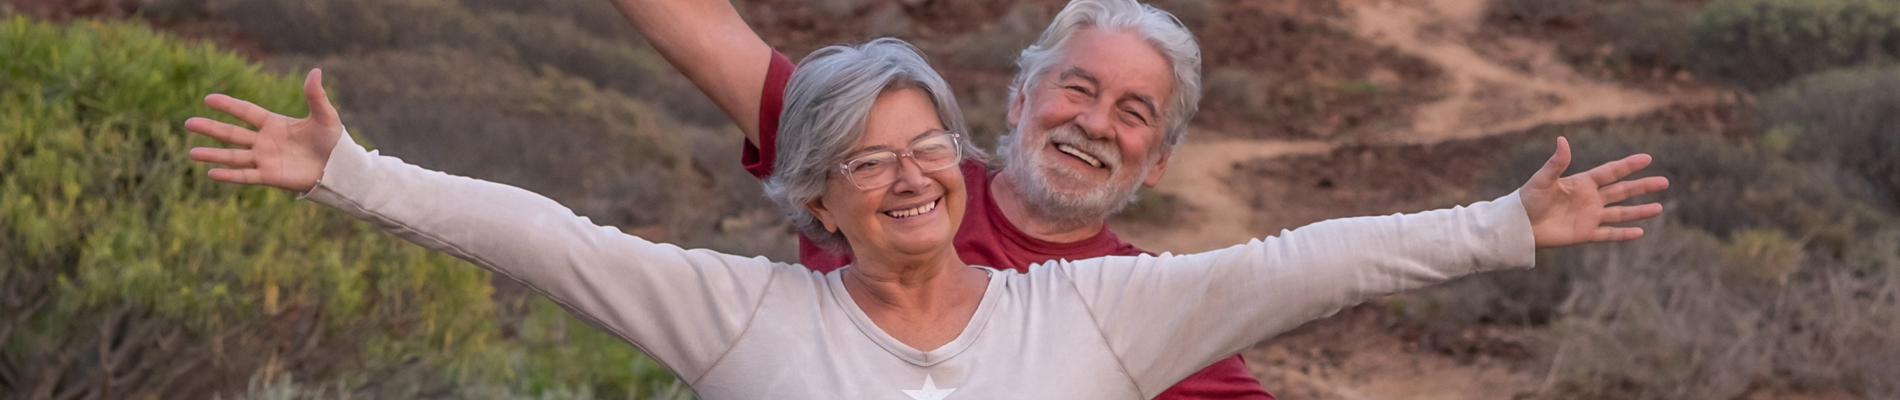 older couple grinning with out streched arms on a hicking trail